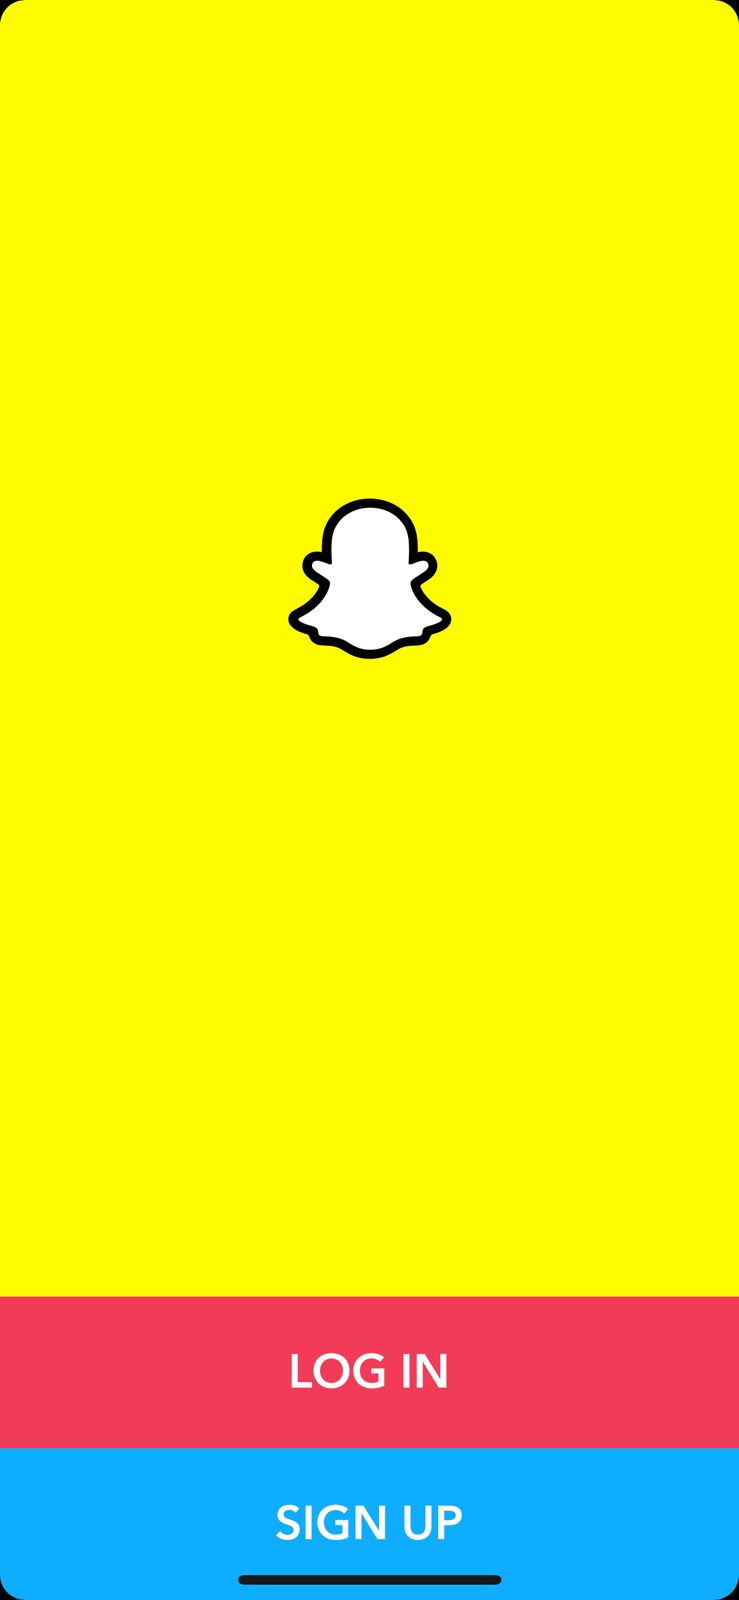 Create your own Snapchat account